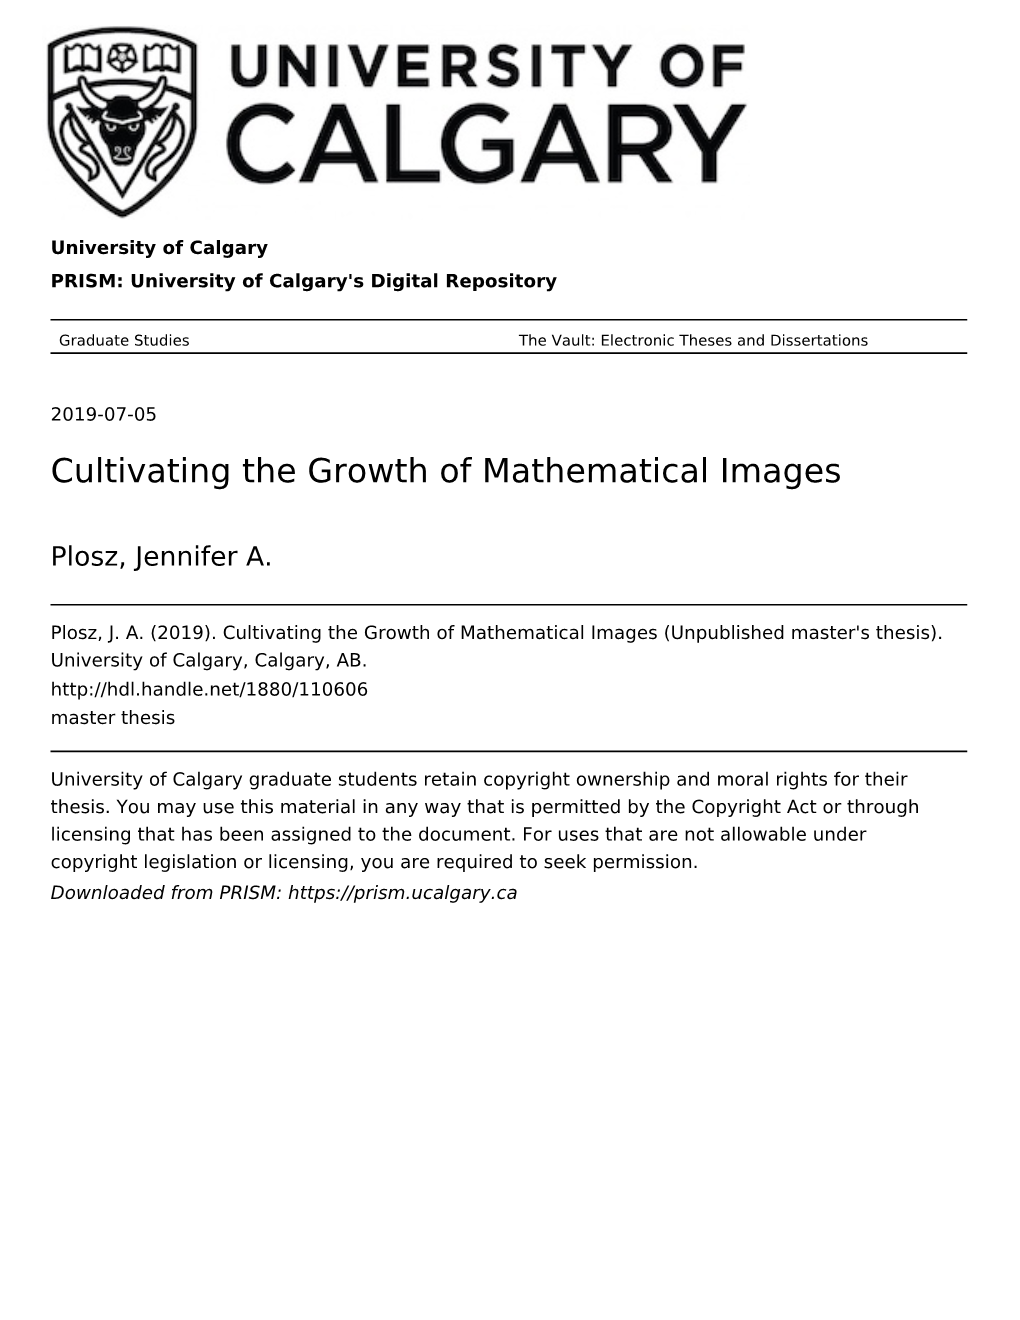 Cultivating the Growth of Mathematical Images